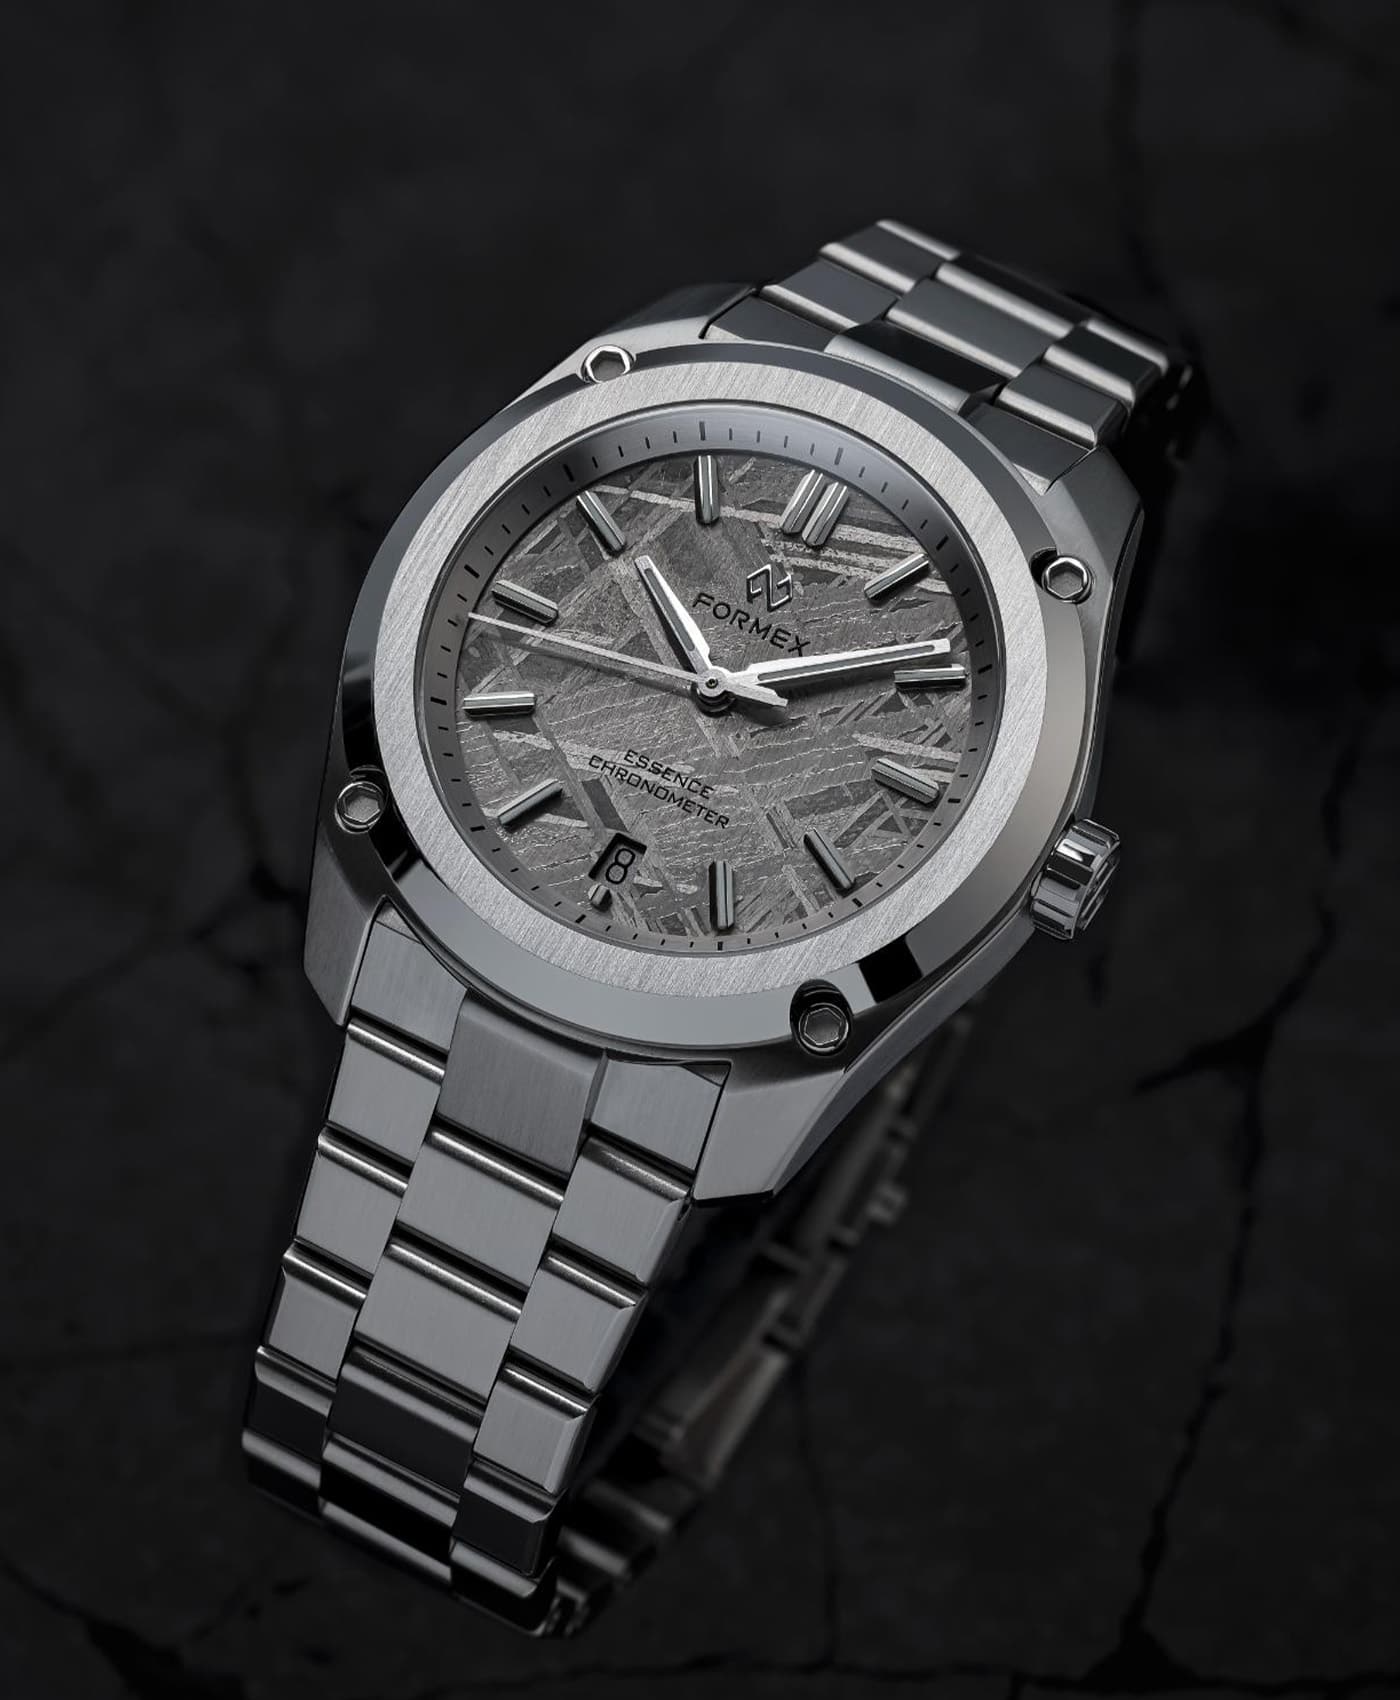 Formex - Essence ThirtyNine (39mm) Automatic Chronometer - SPACE ROCK - Limited Edition - Steel Bracelet-mood-min